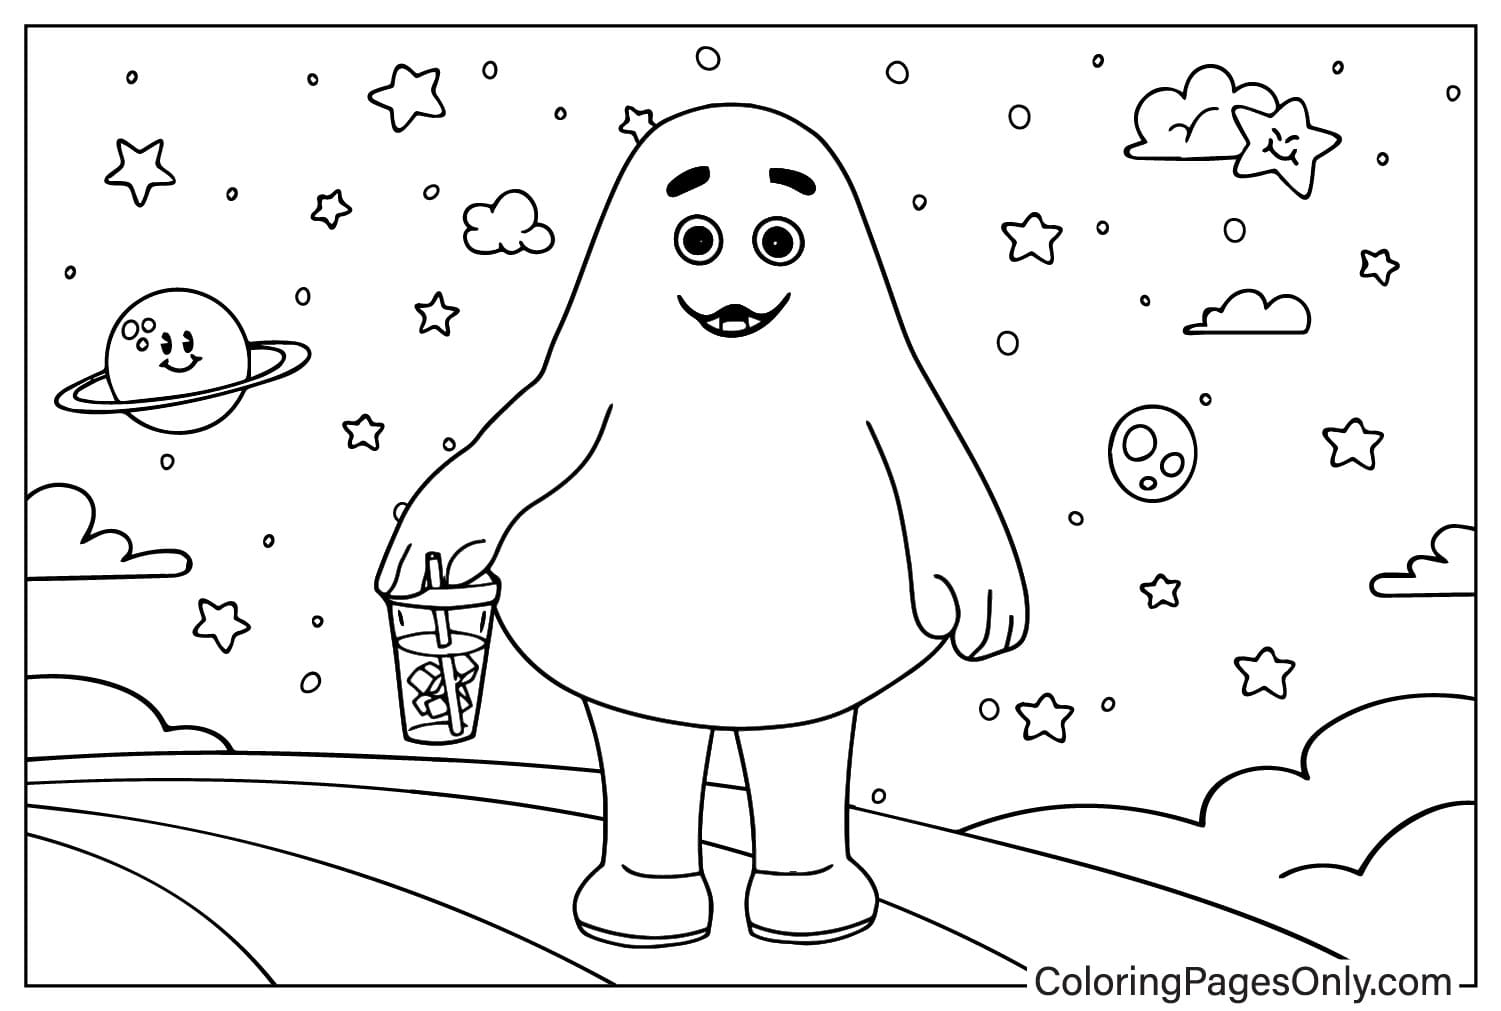 Grimace Coloring Sheet for Kids from Grimace